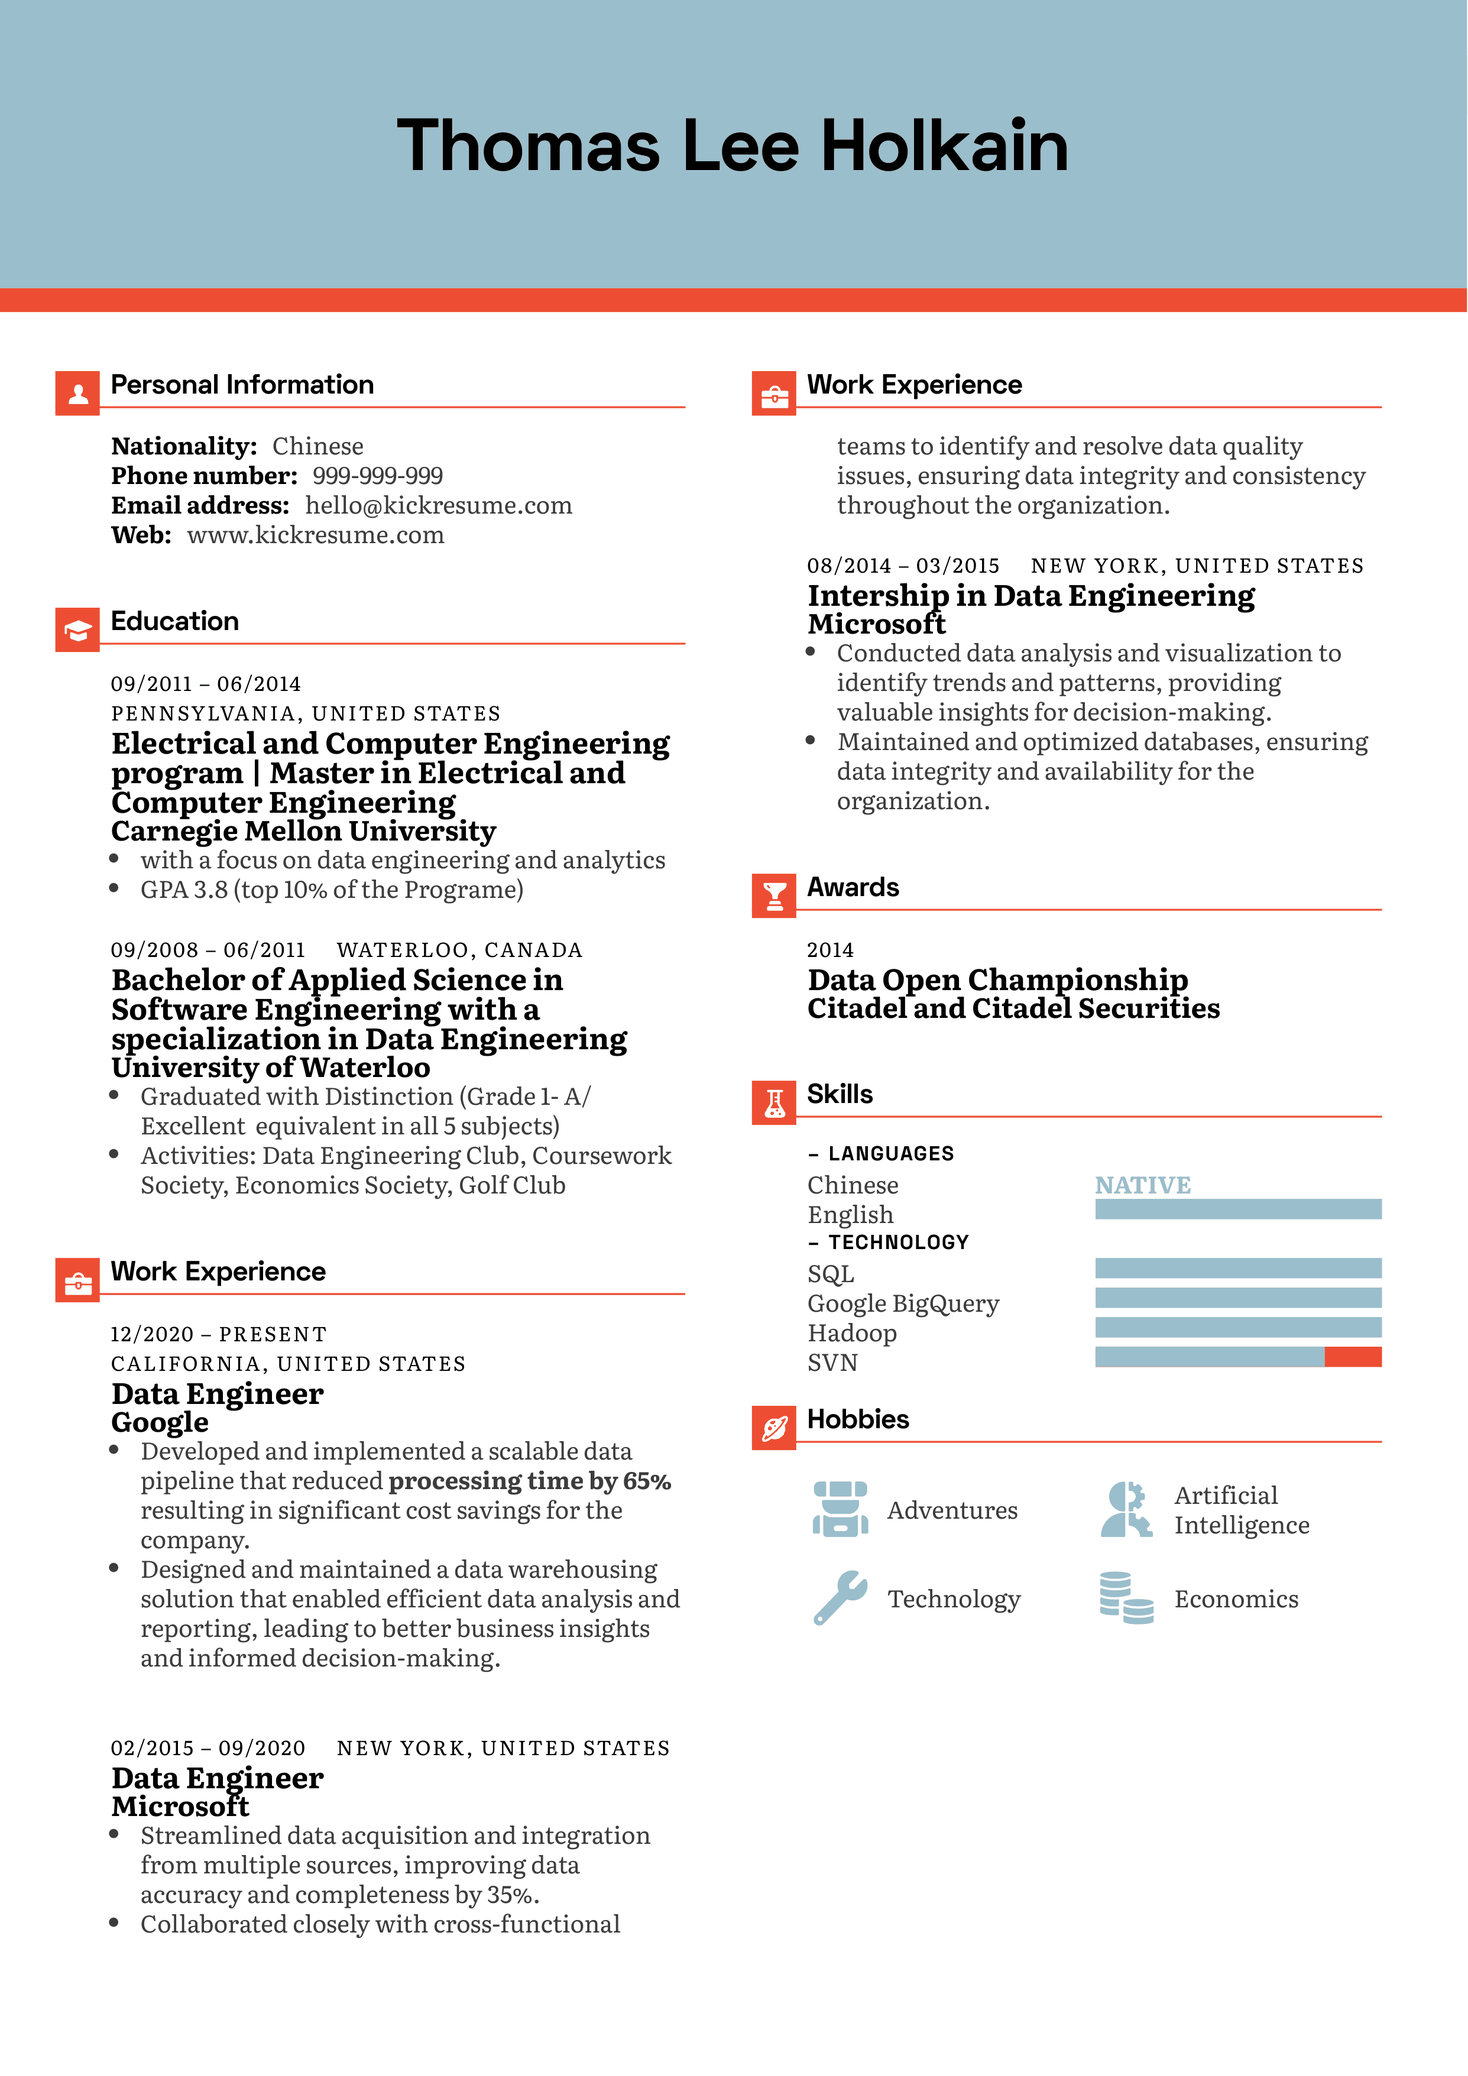 Client Success Manager at Shopify Resume Sample